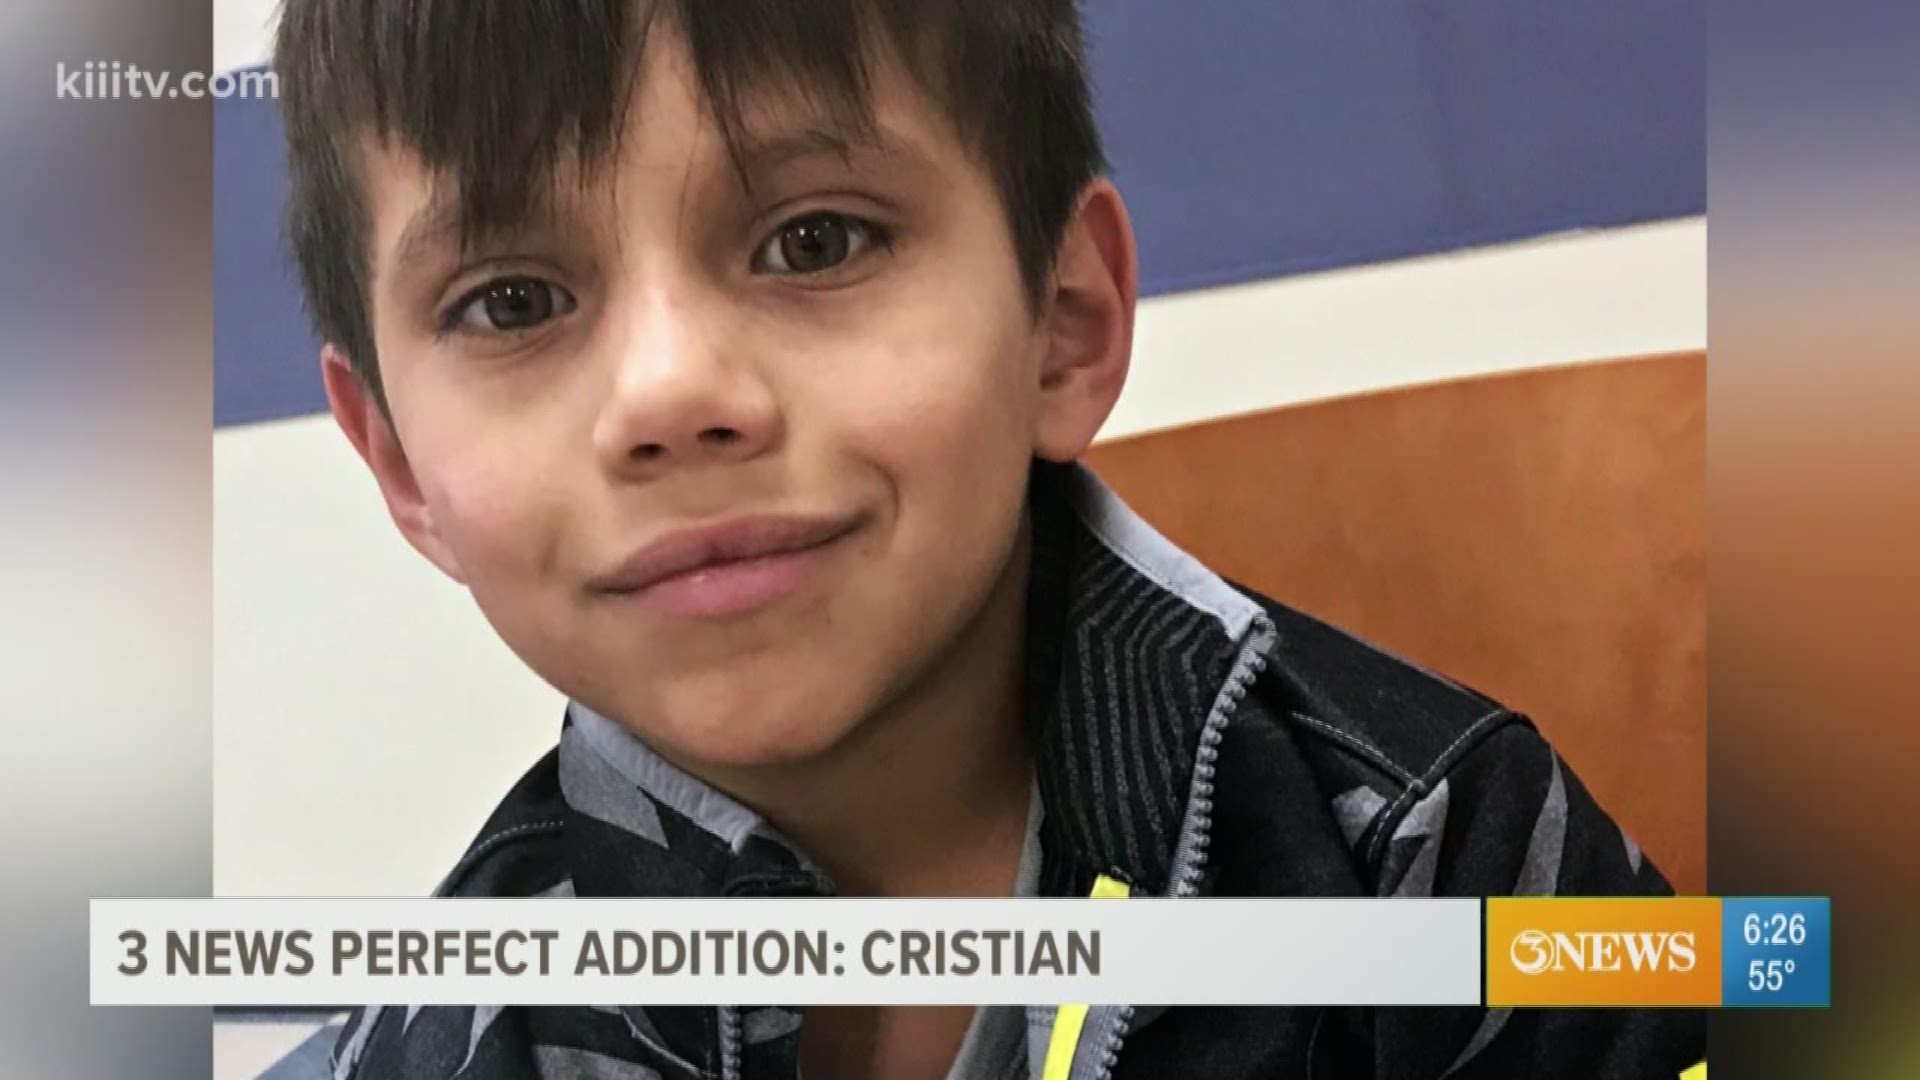 Meet nine-year-old Cristian, a very creative and intelligent boy who loves to play outdoors, and whose favorite place to eat out is McDonalds.